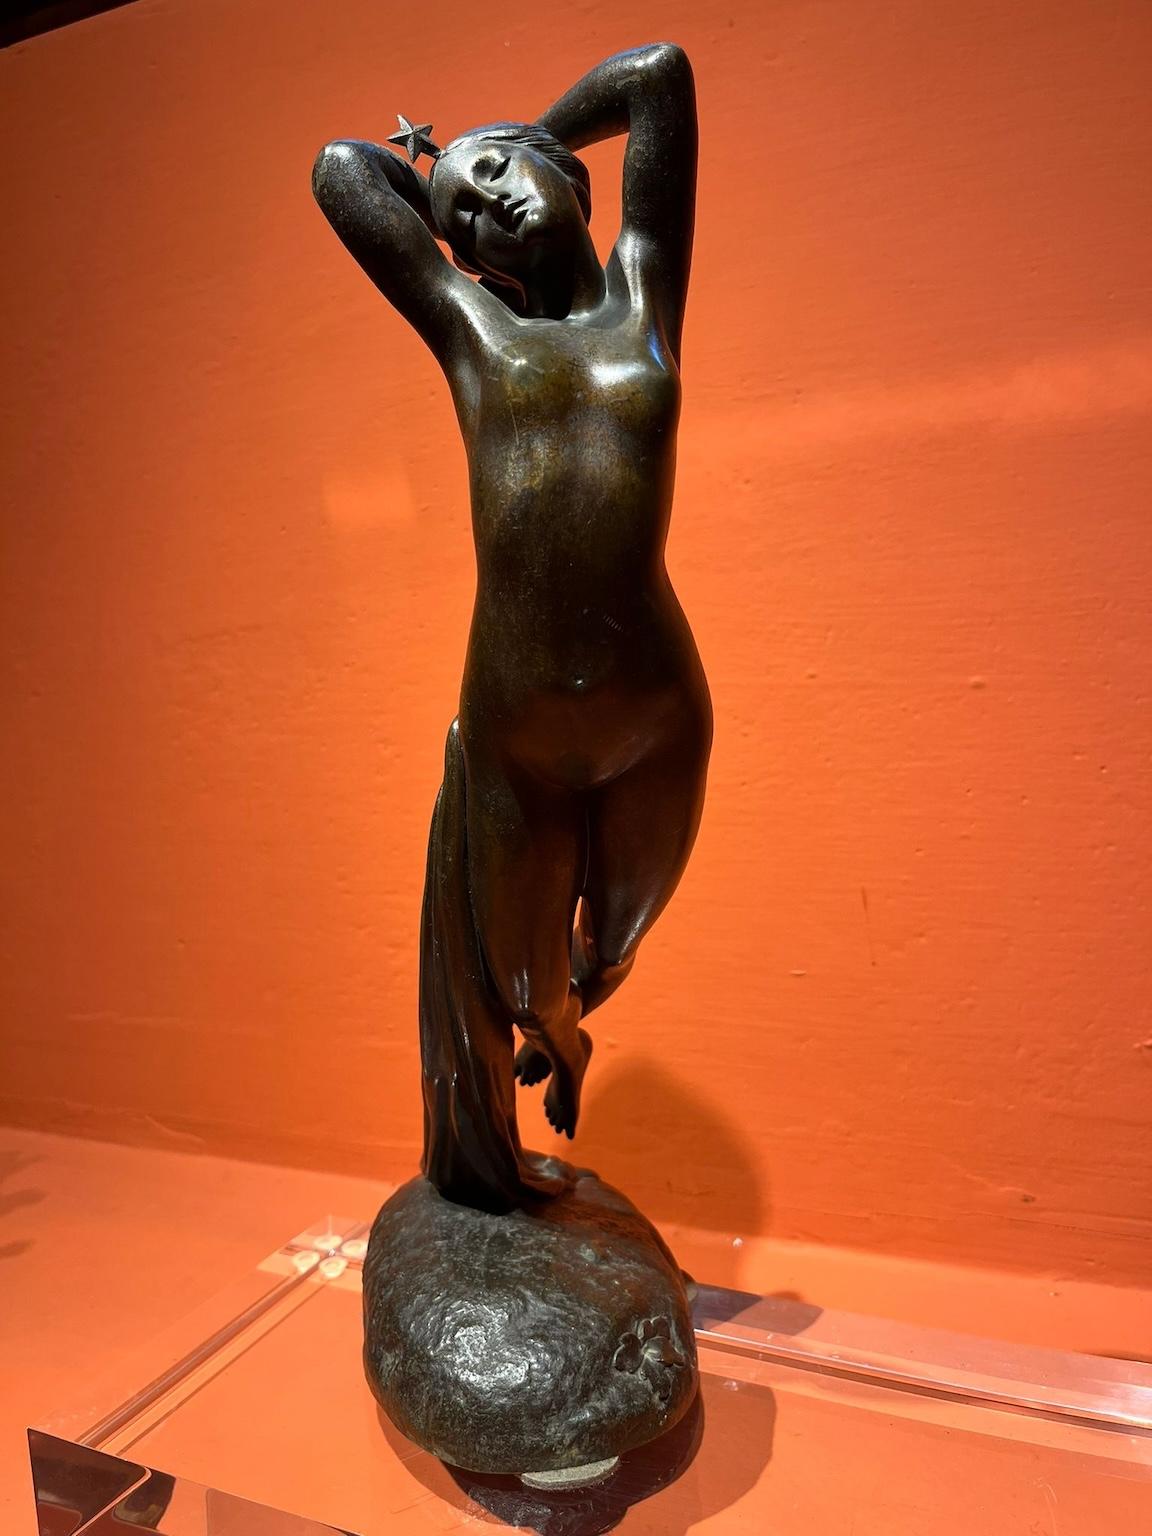 19th century French mythological figurative female bronze statuette - Sculpture by Joseph Pollet